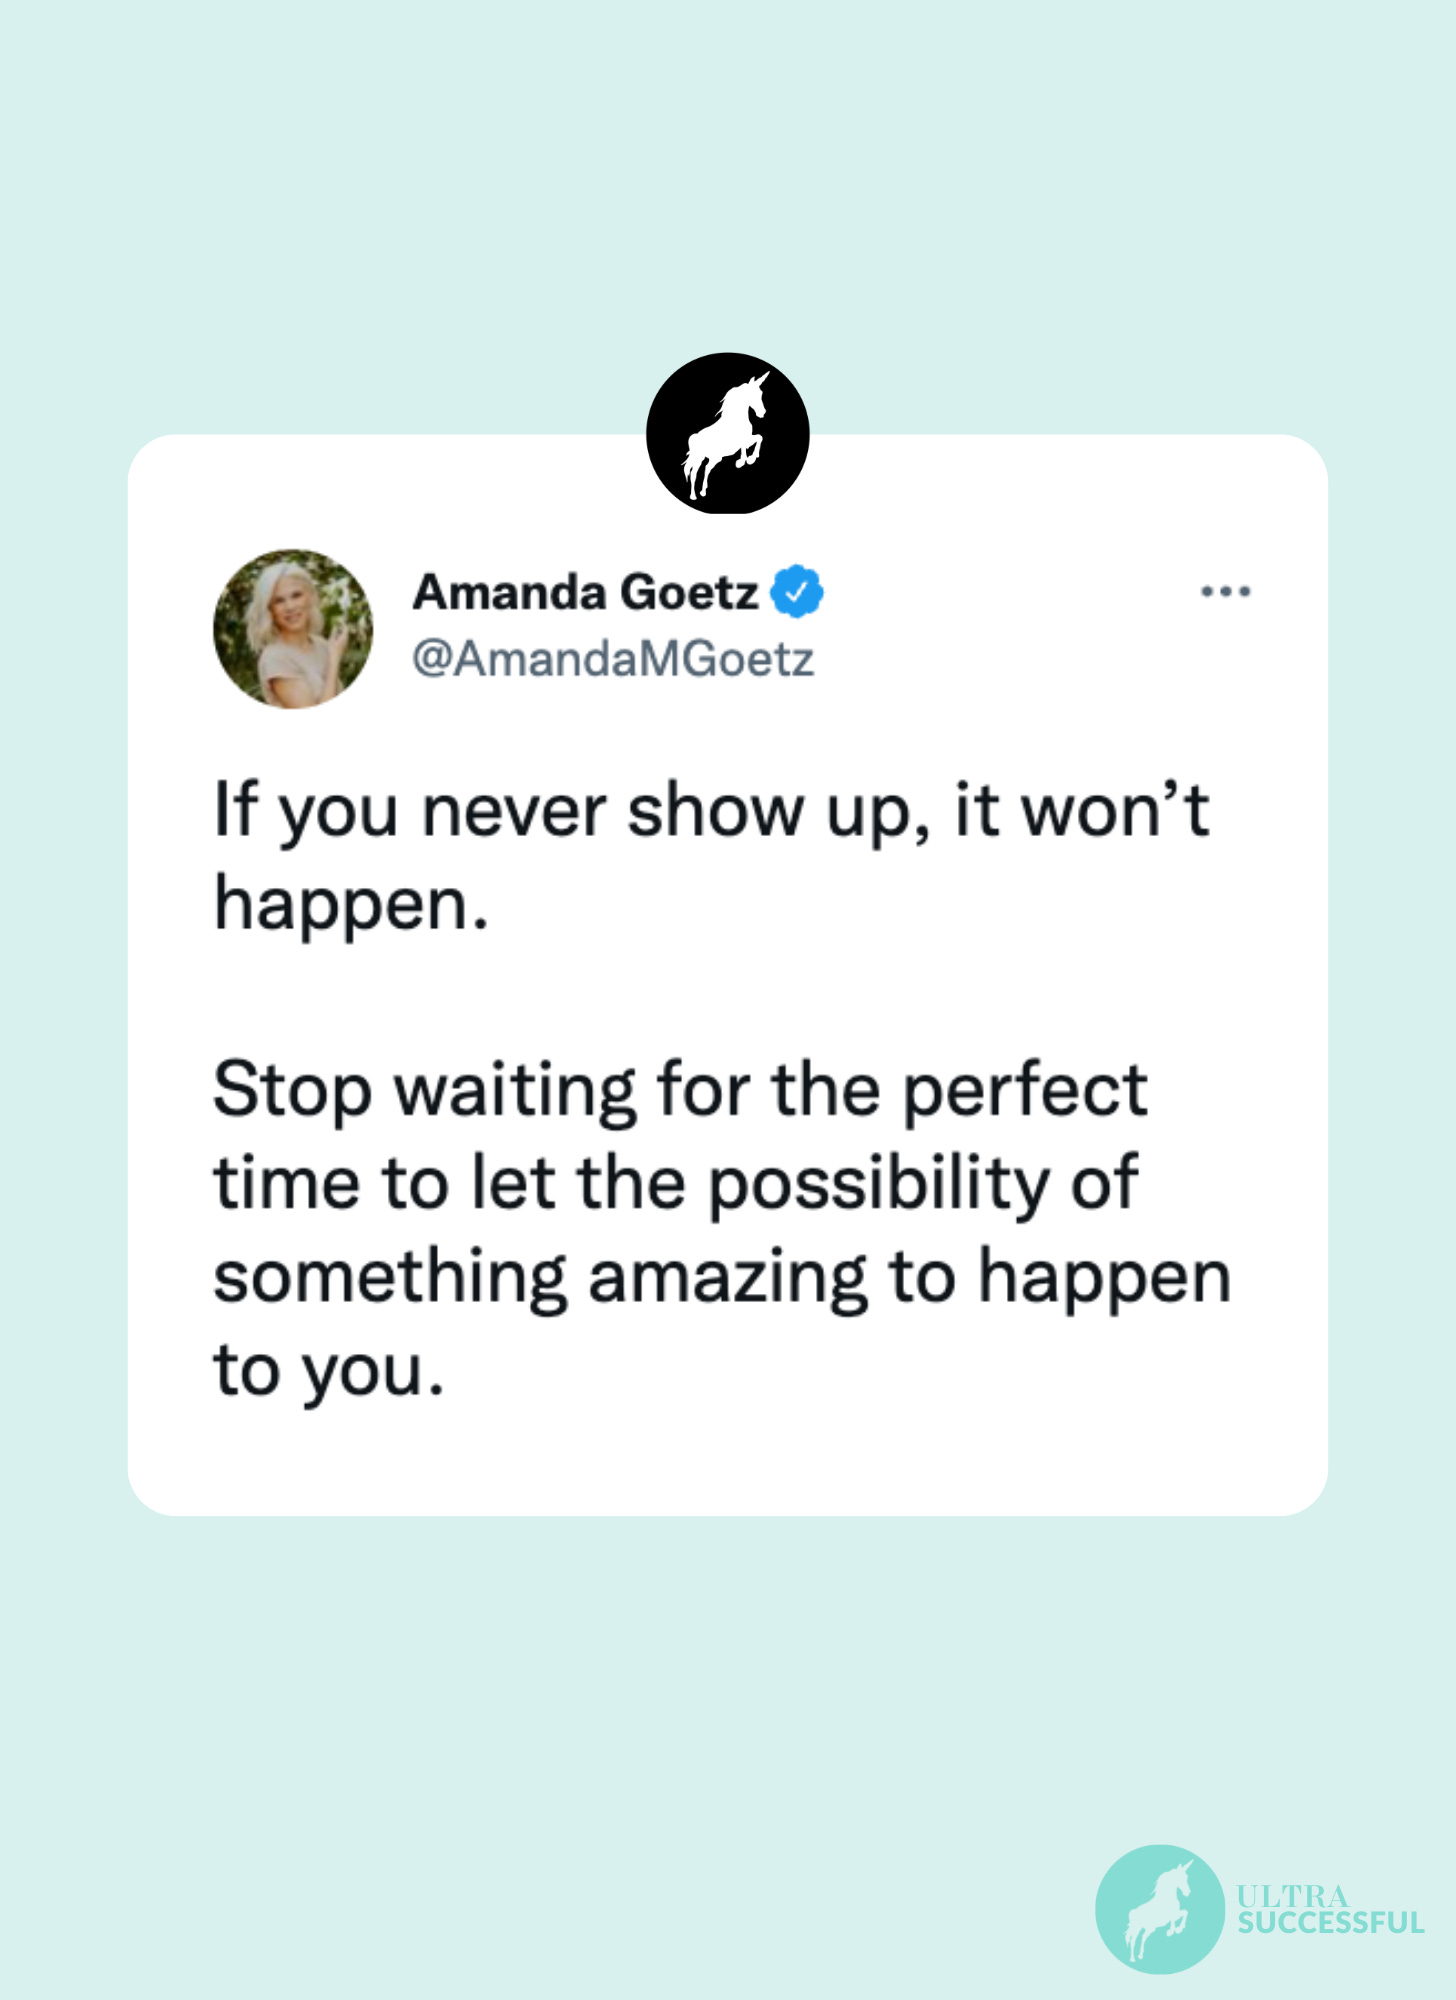 @AmandaMGoetz: If you never show up, it won’t happen.   Stop waiting for the perfect time to let the possibility of something amazing to happen to you.